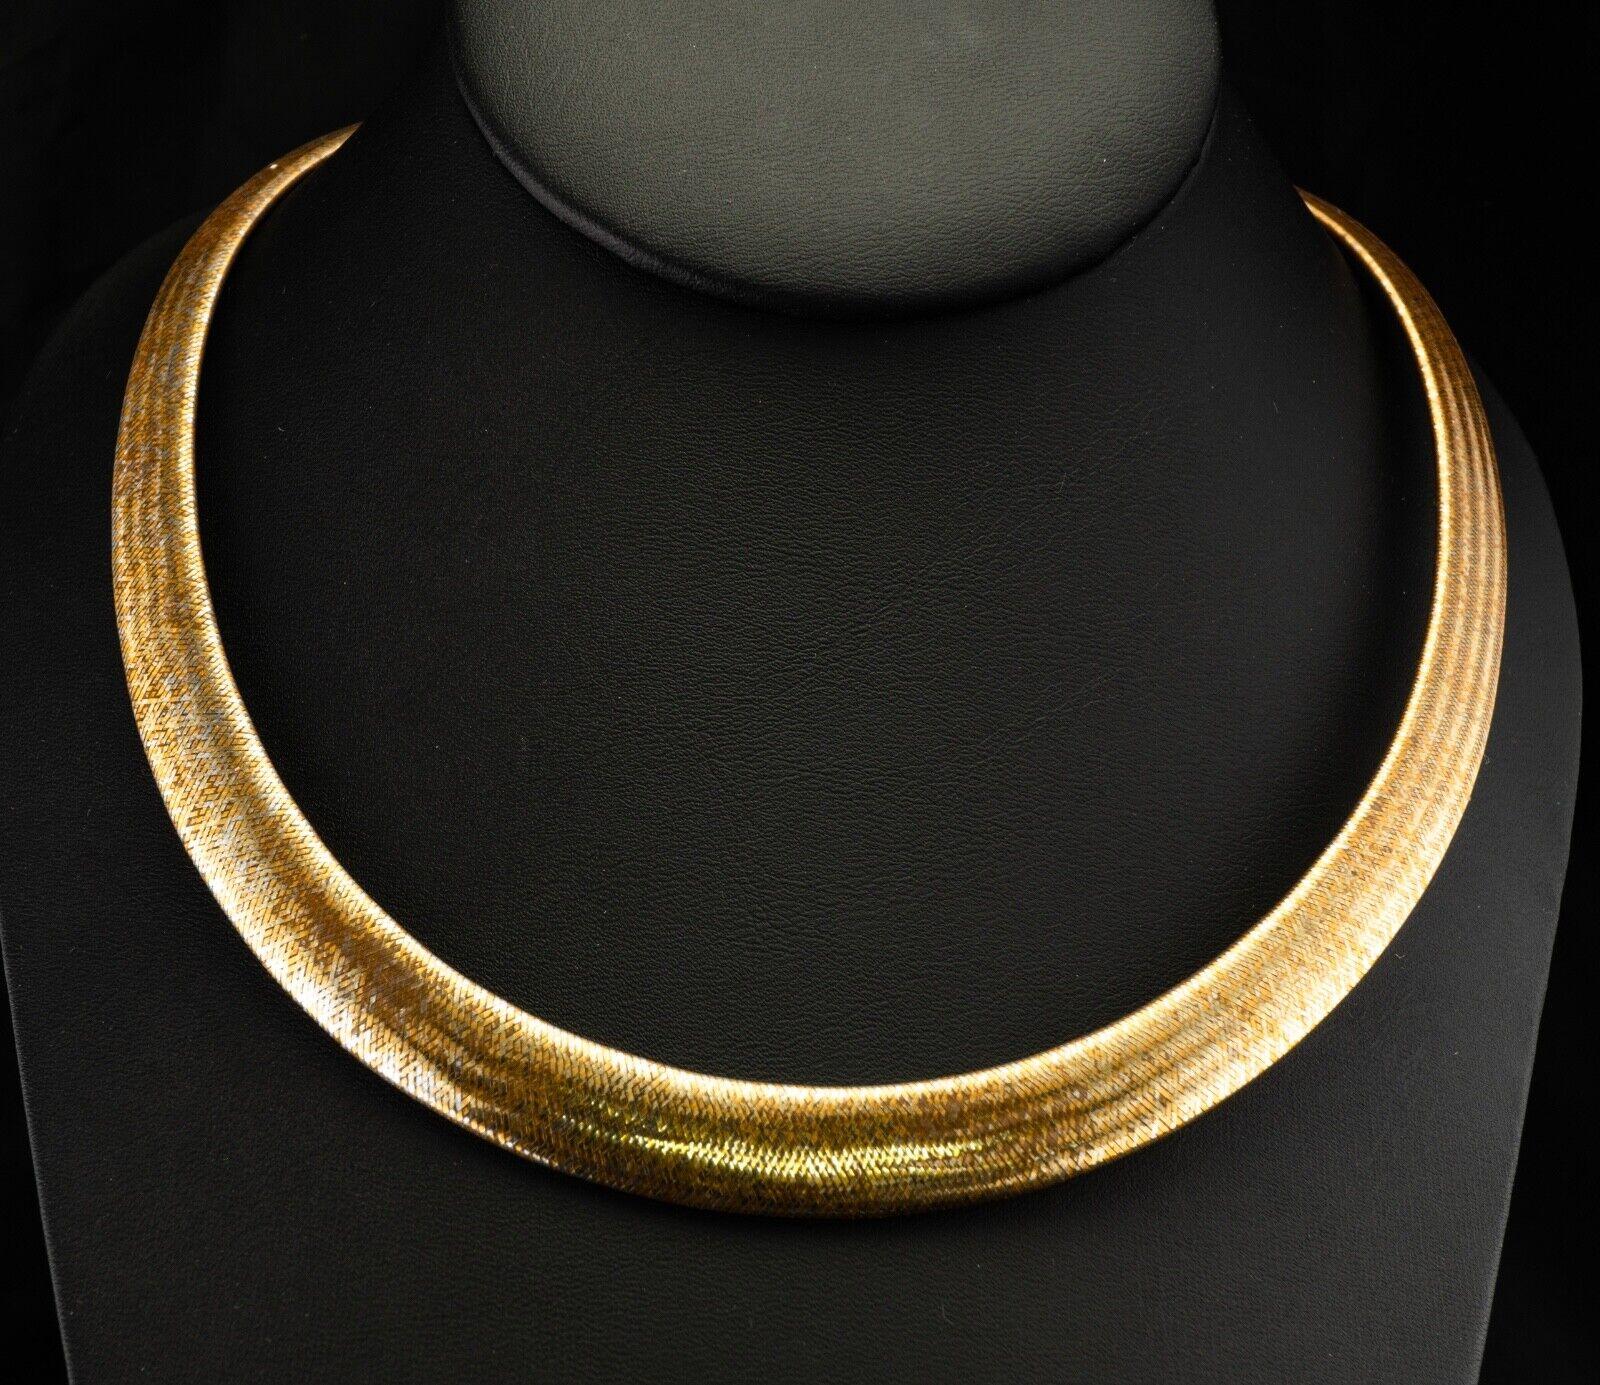 Egyptian Style Necklace Choker 14K Gold Italy

This gorgeous estate necklace / choker is made in Italy and crafted in solid 14K Yellow Gold. The choker is flexible and it measures 11mm in the center and gradually narrows to 6mm on the back. The